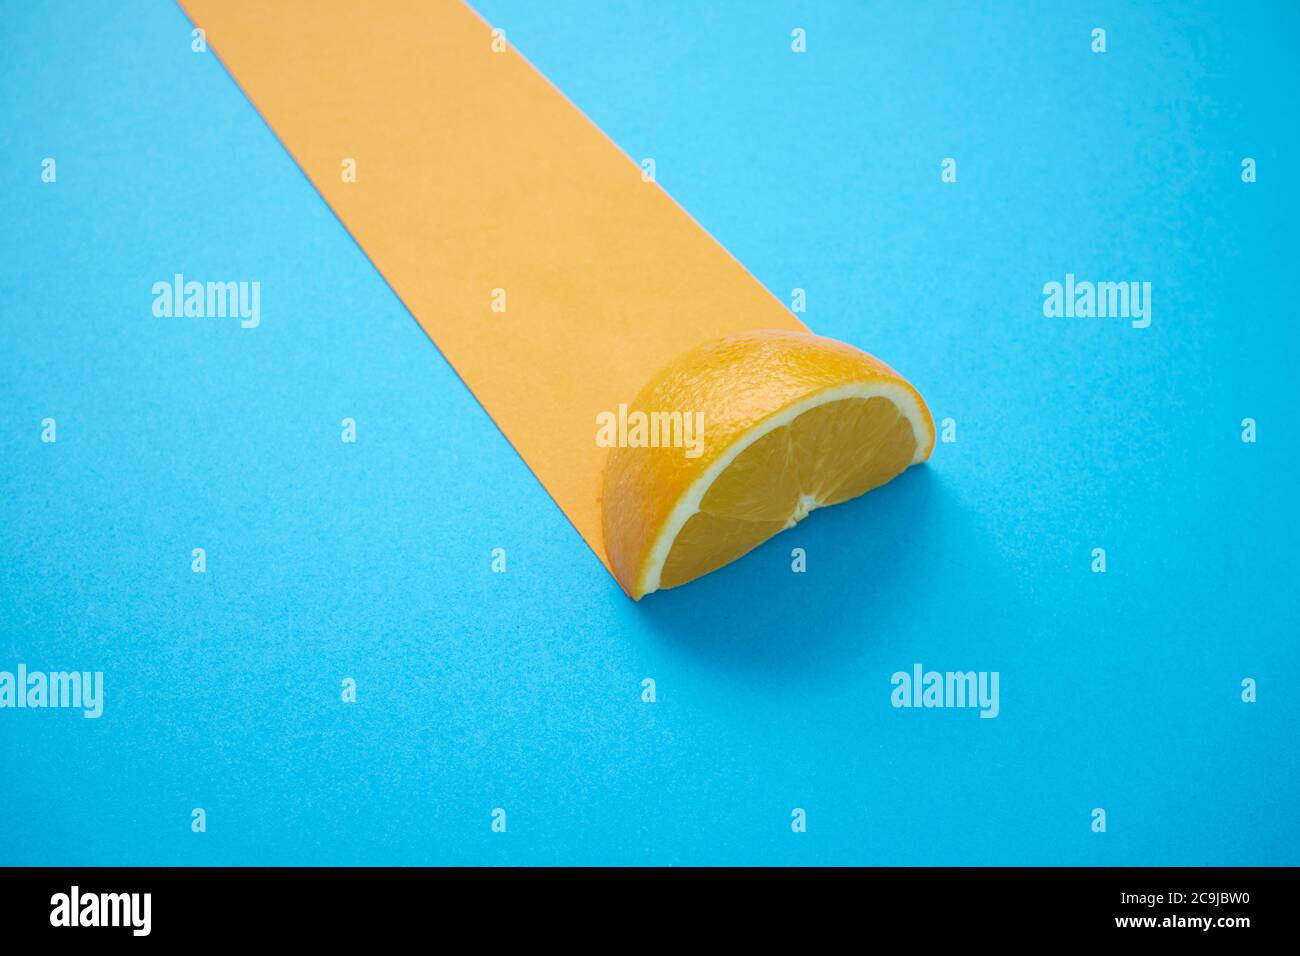 Lemon half and yellow stripe against a blue background. Stock Photo